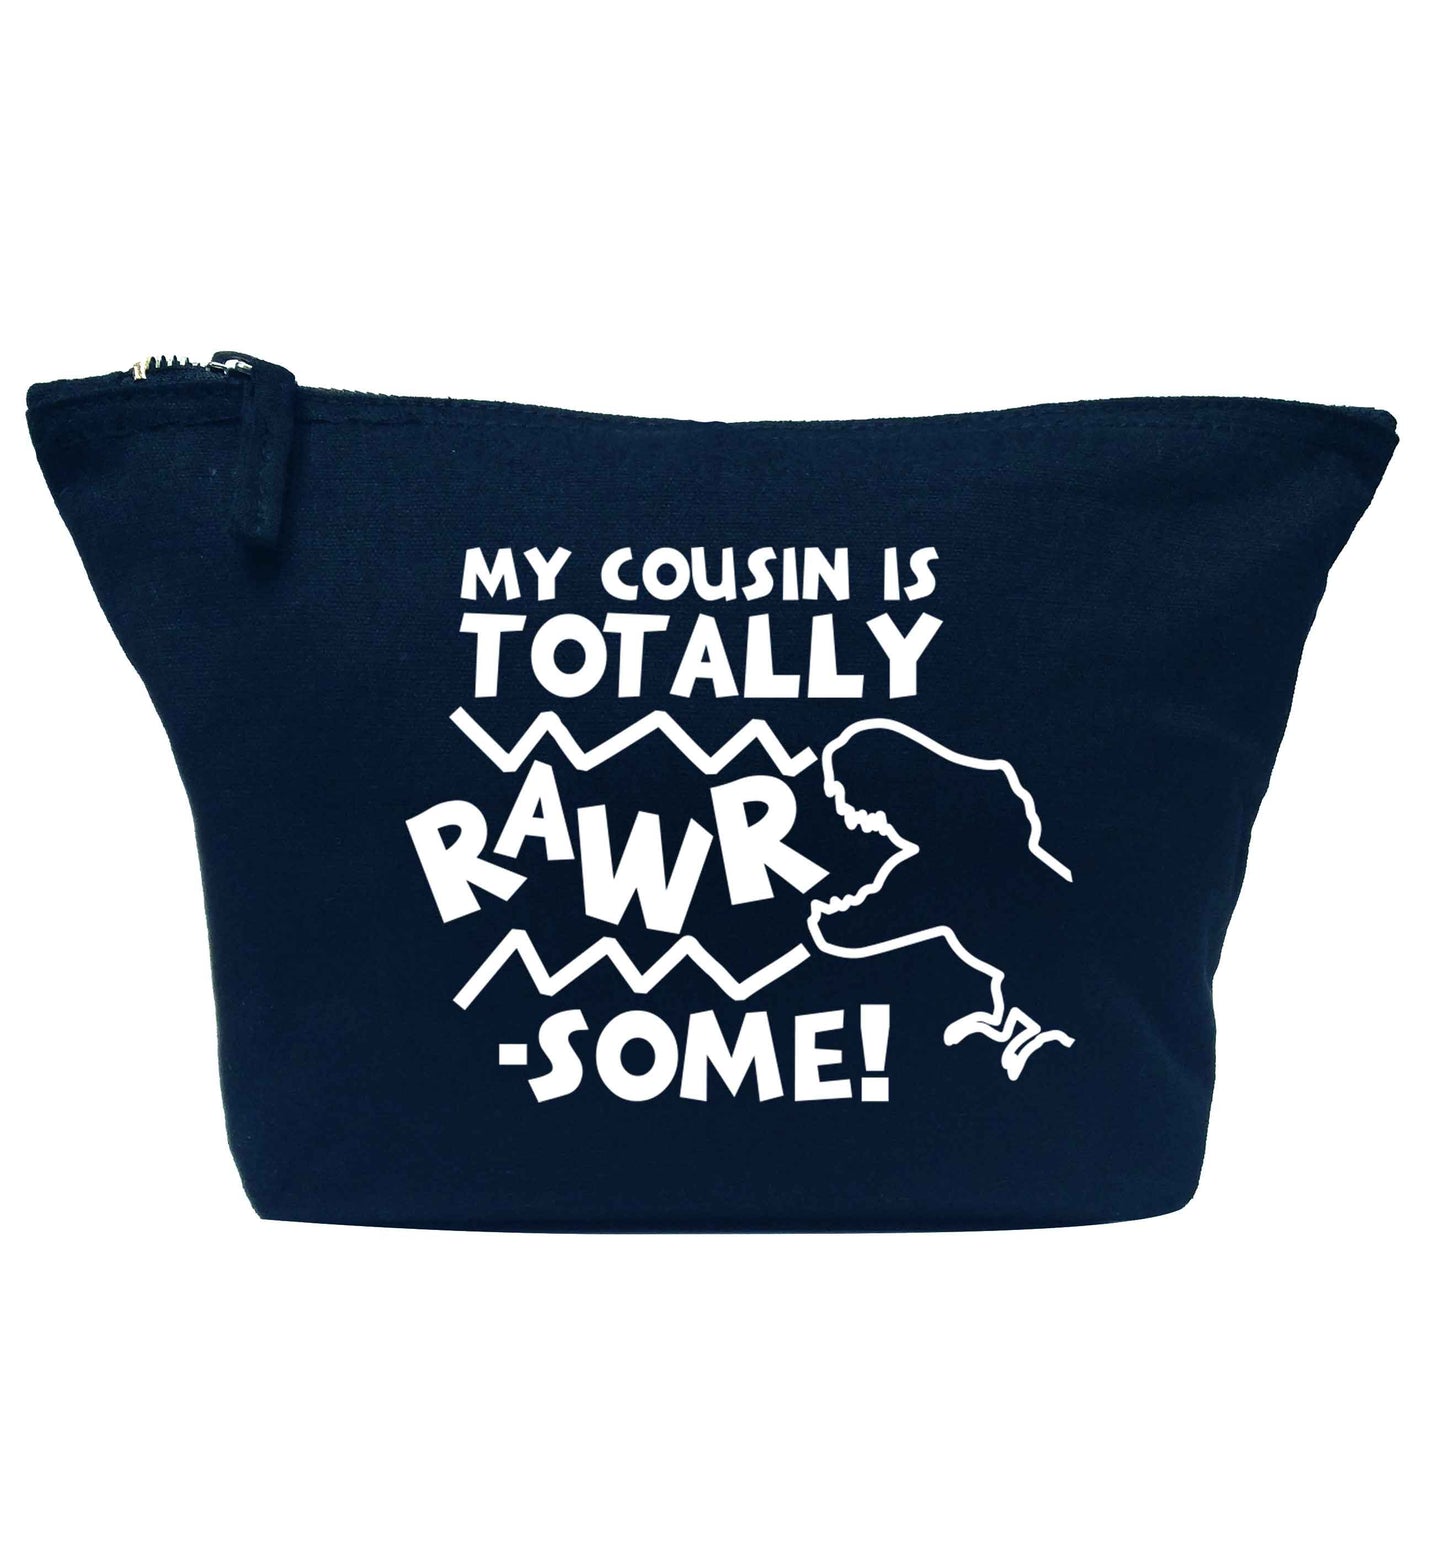 My cousin is totally rawrsome navy makeup bag